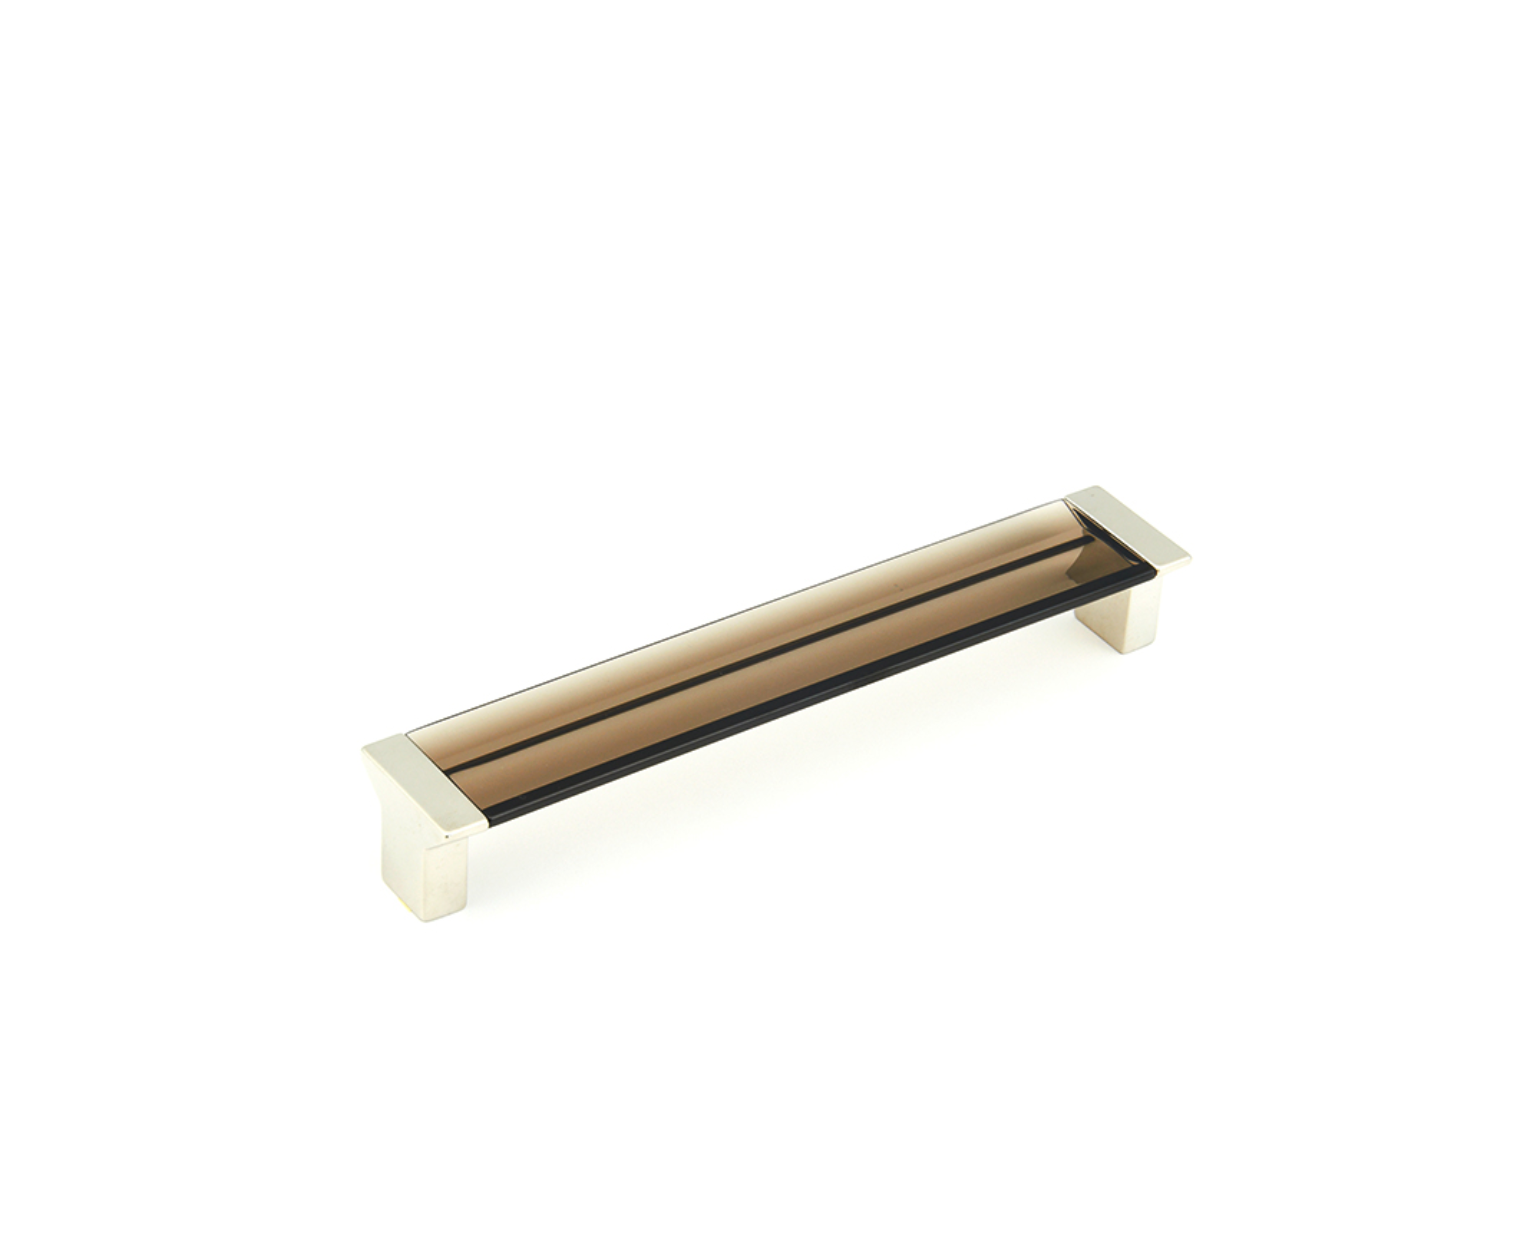 Satin Nickel "Ponce" Smoked Glass Cabinet Knob and Drawer Pulls